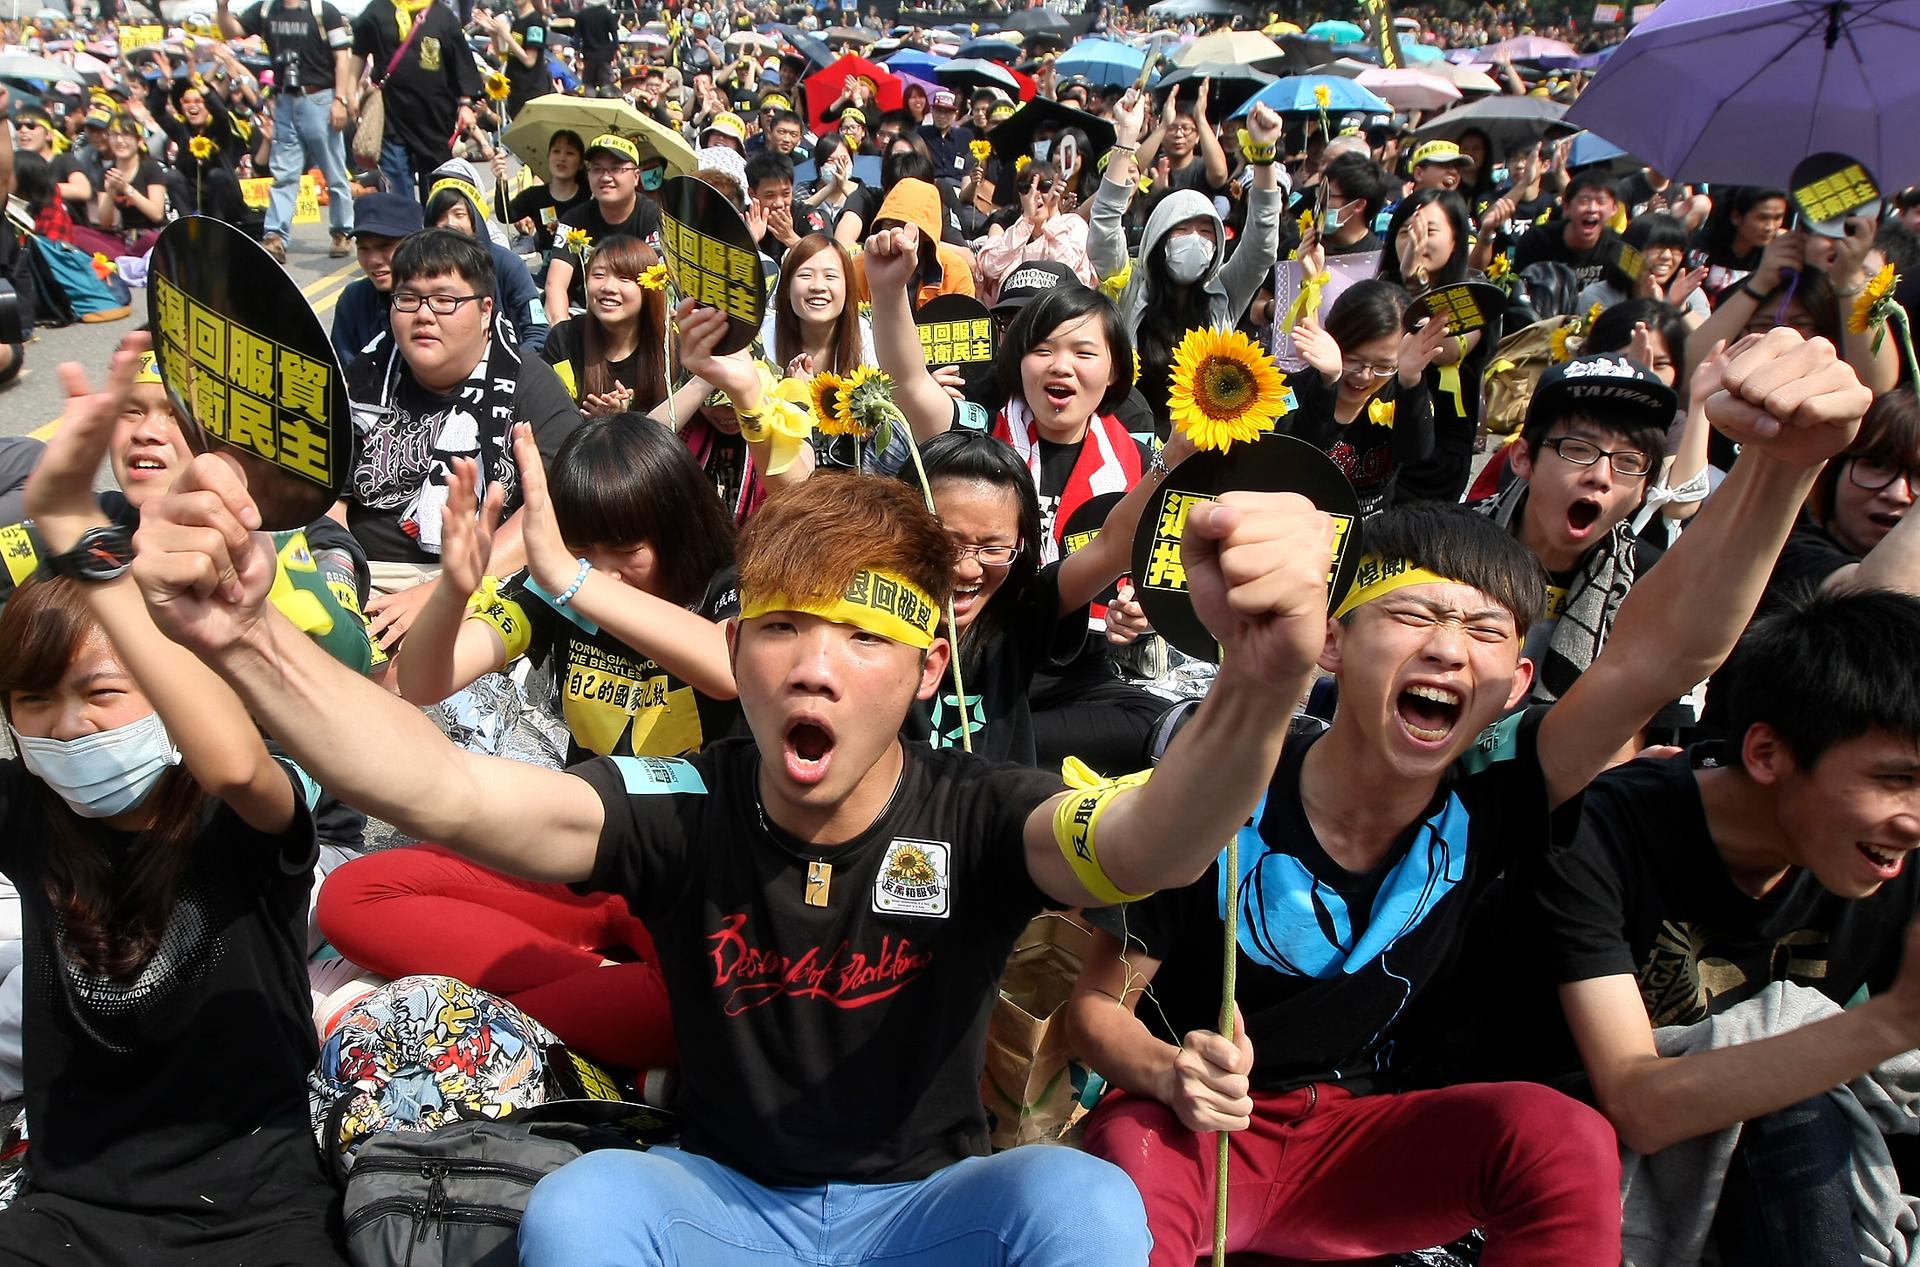 Demonstrators shout slogans in front of the Presidential Office in Taipei on March 30, 2014. Thousands of demonstrators marched the streets to protest against the controversial trade pact with mainland China.